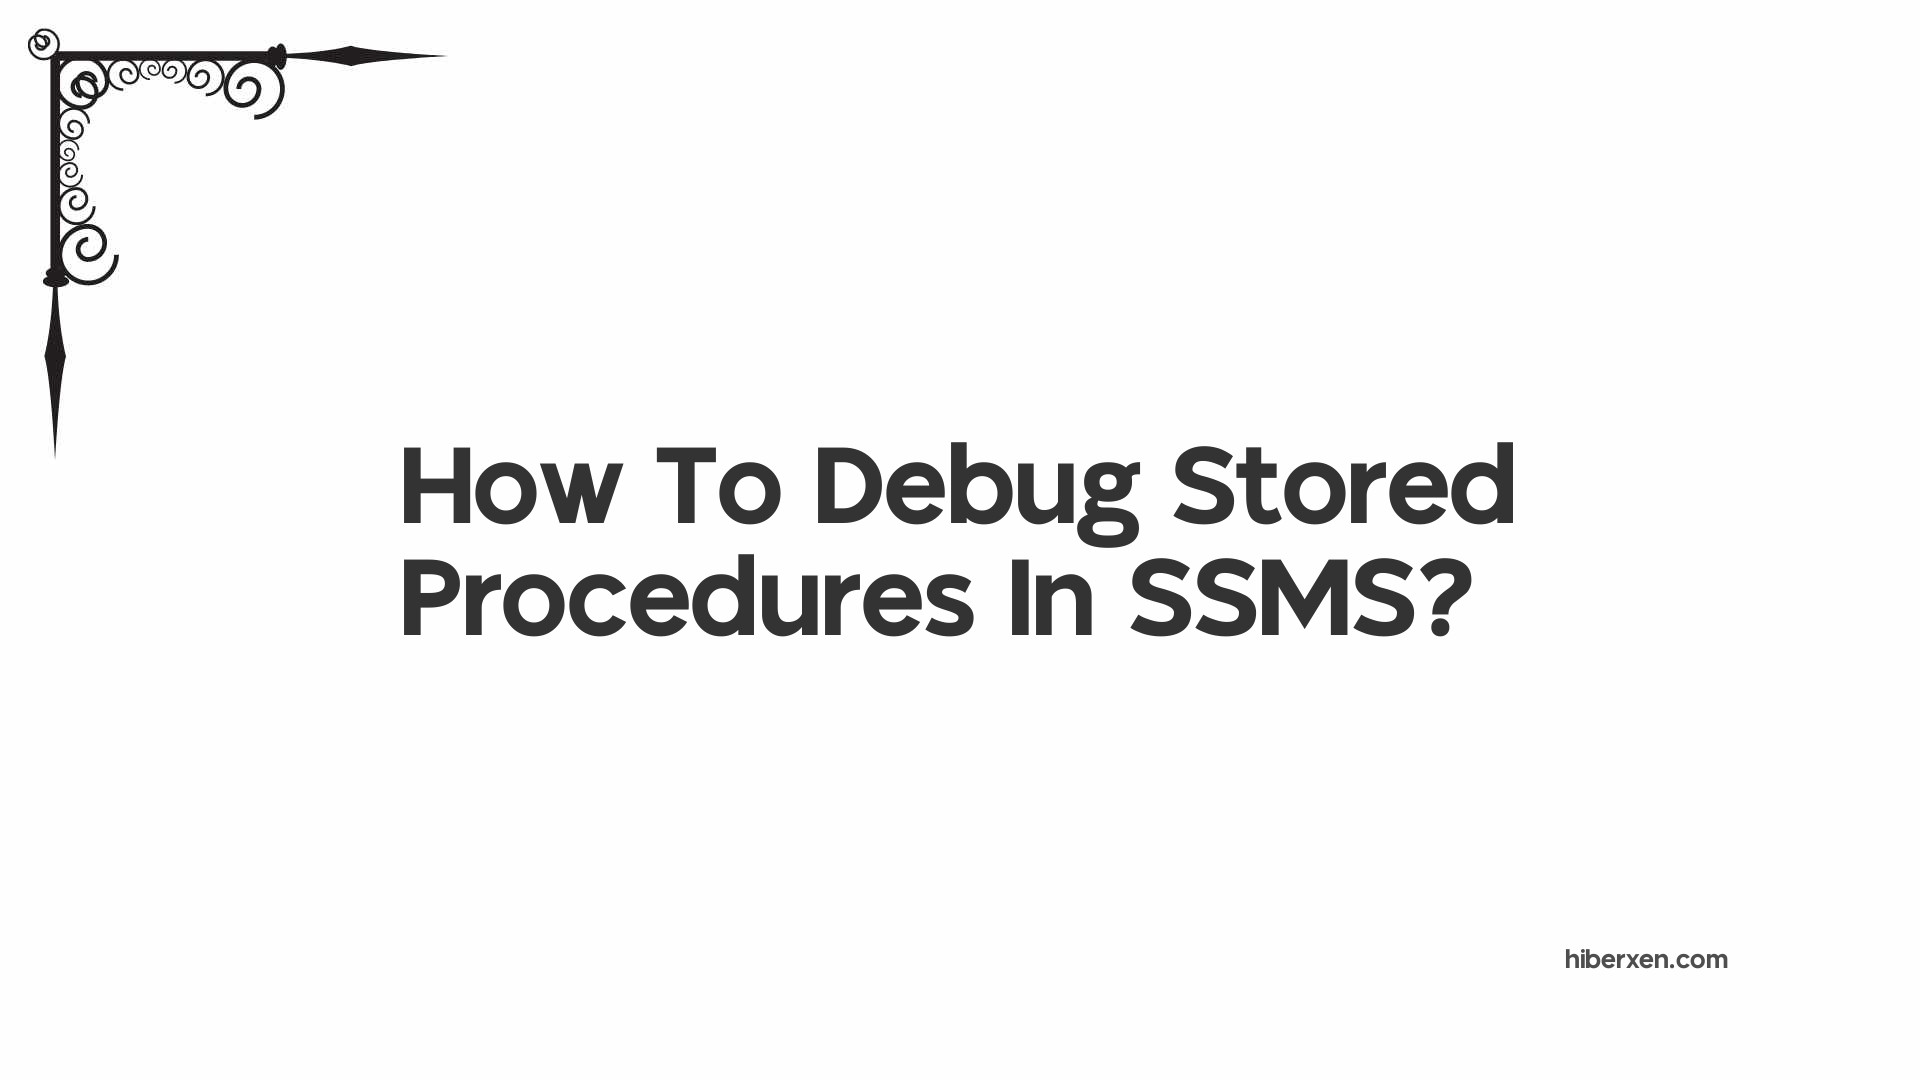 How To Debug Stored Procedures In SSMS?